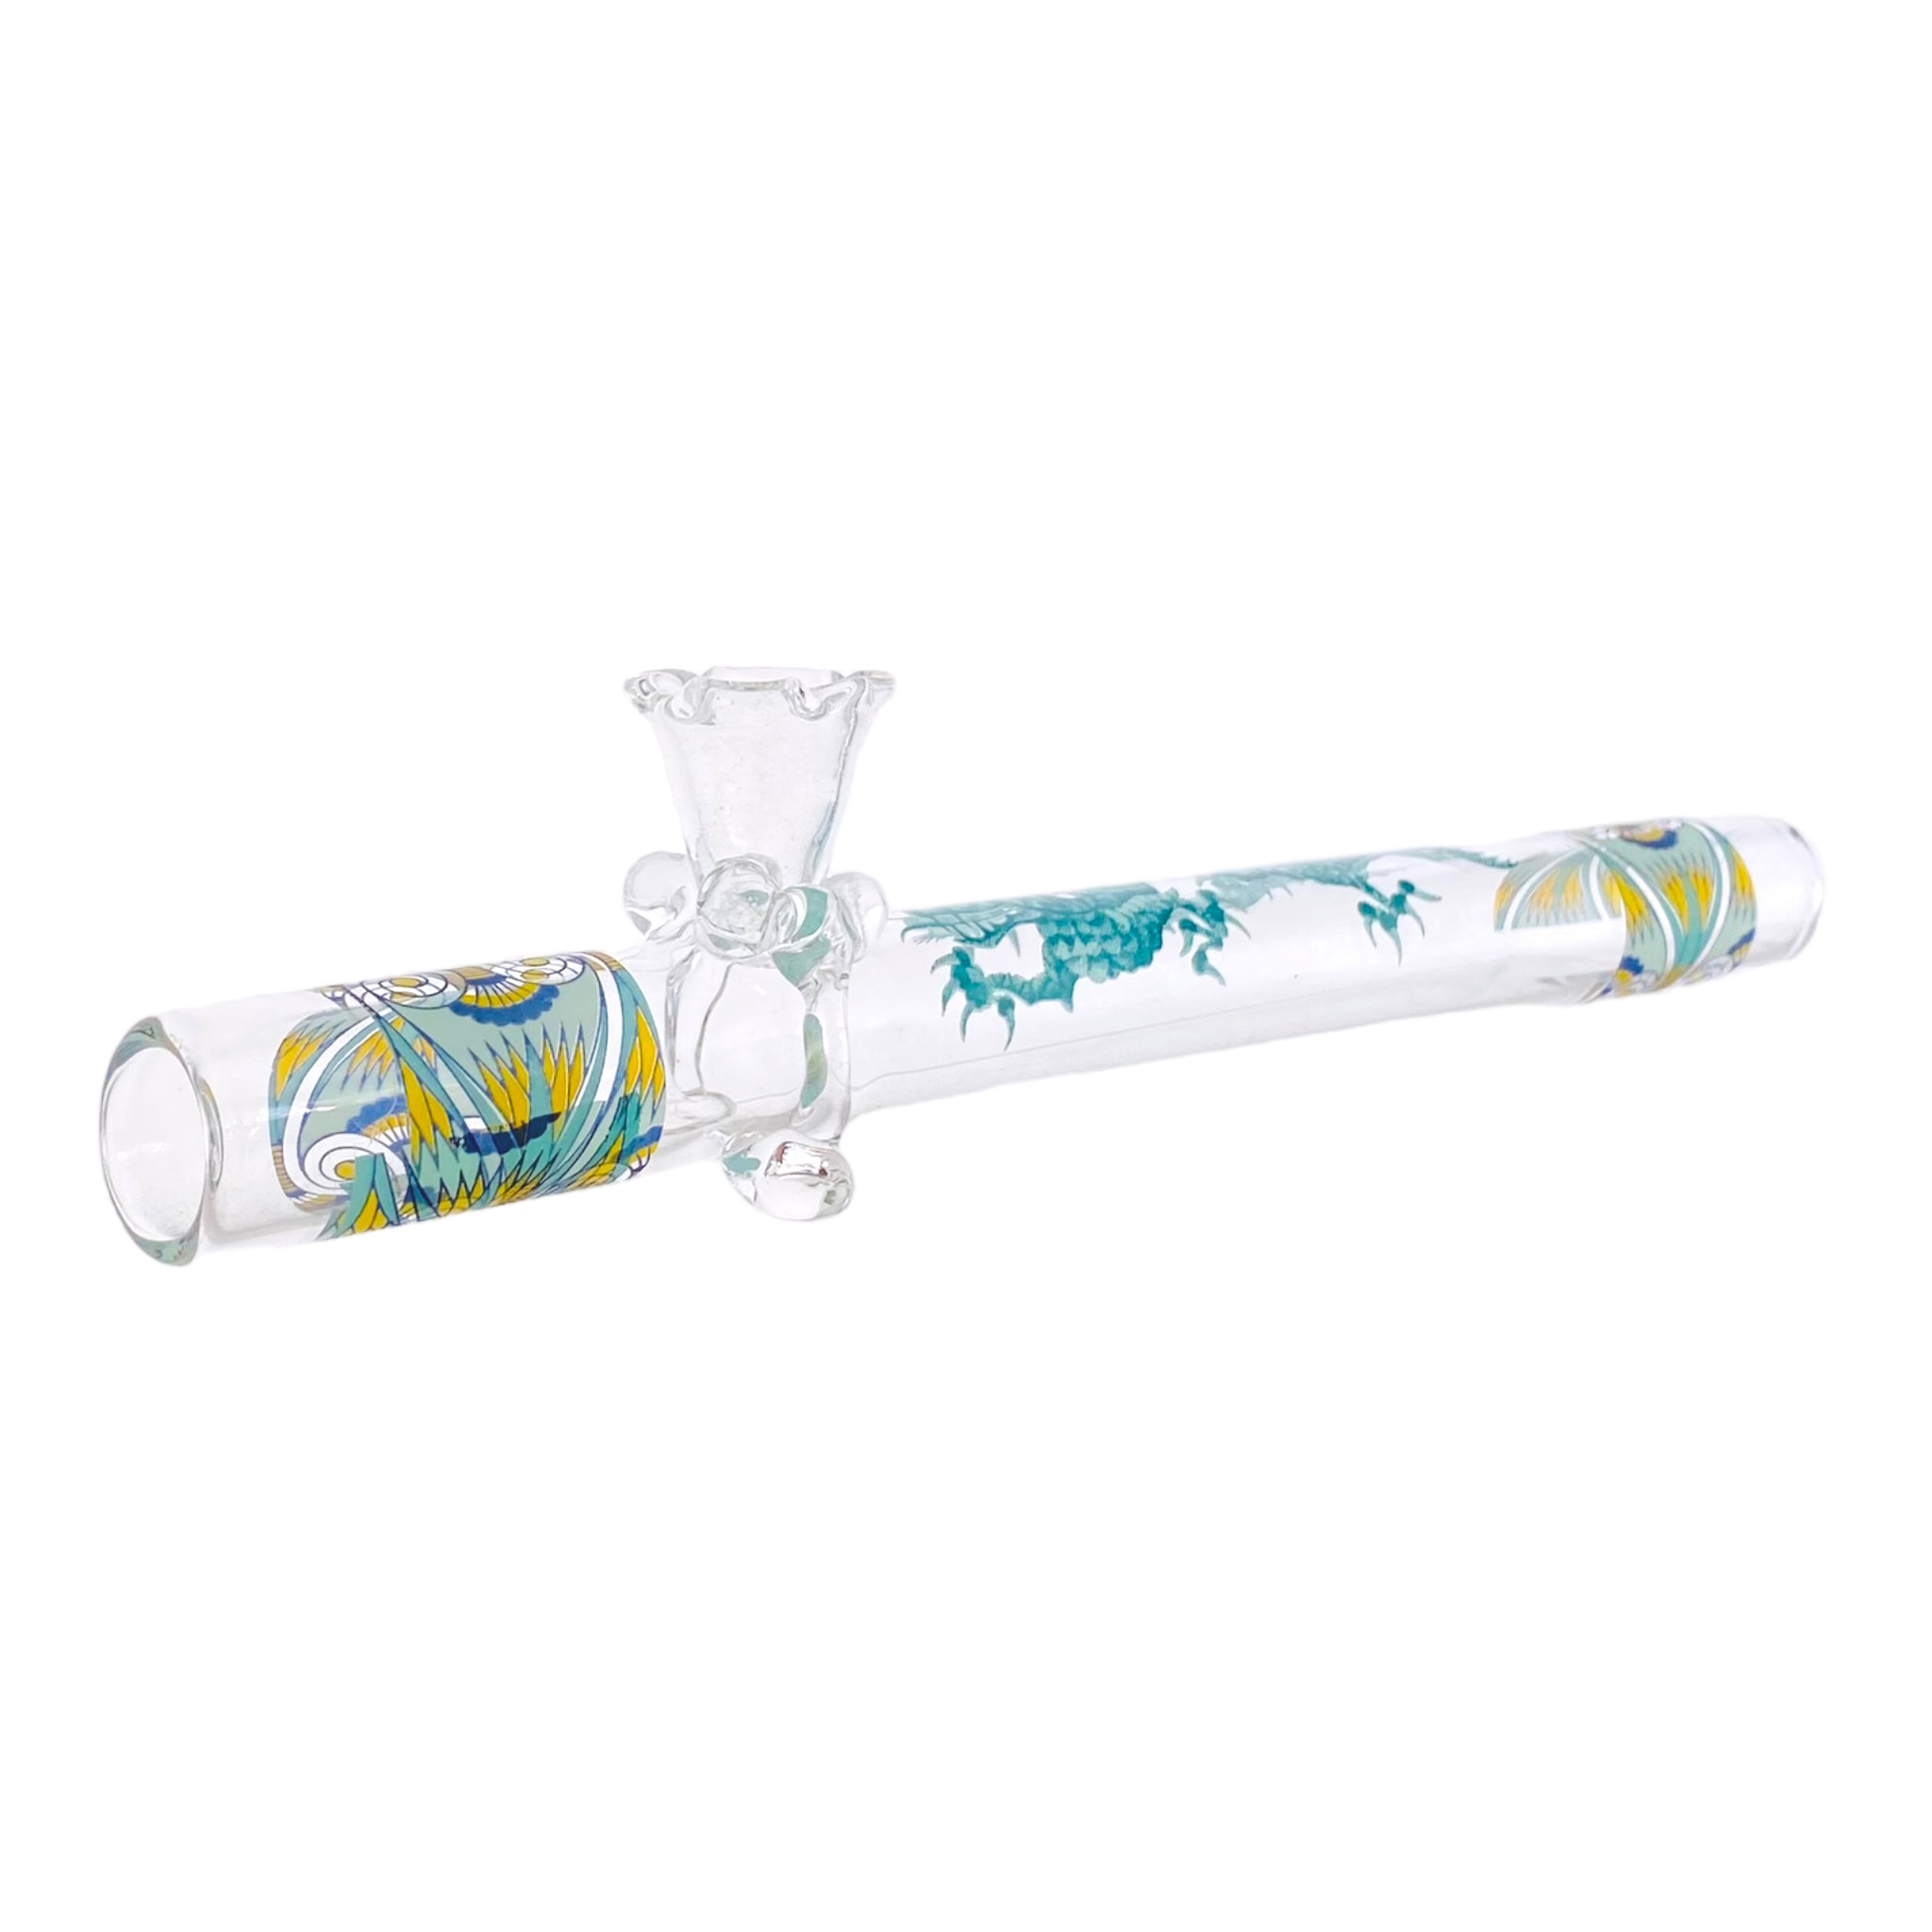 8 inch long Clear Steamroller With Blue Dragon